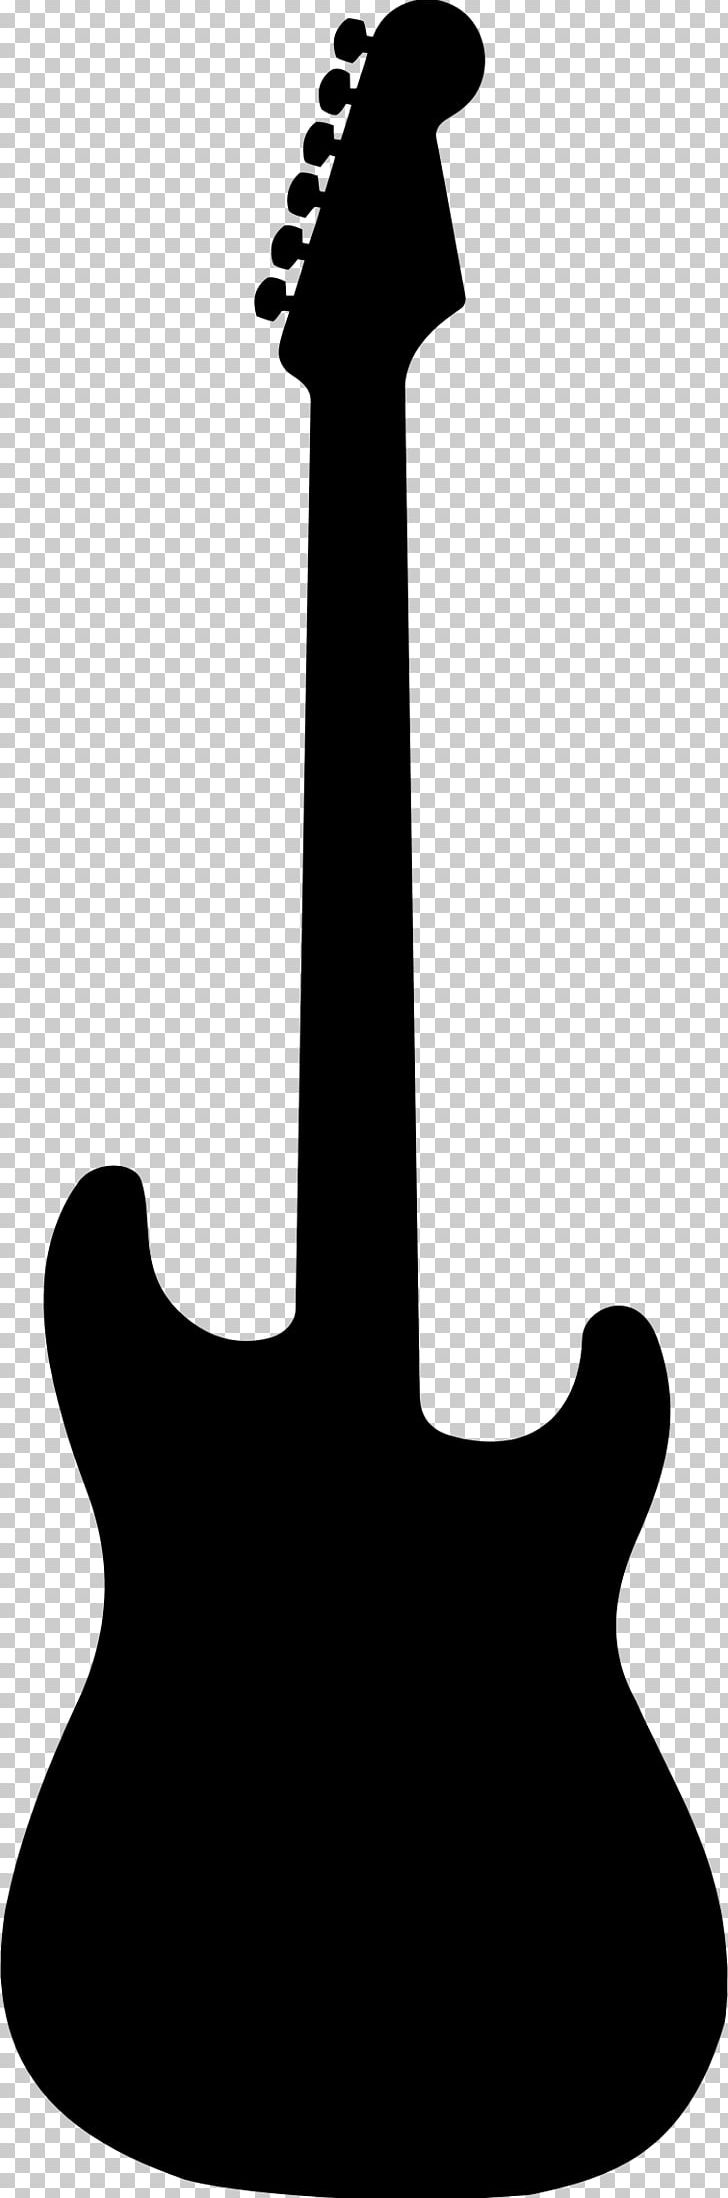 Fender Stratocaster Ibanez RG Electric Guitar Bass Guitar PNG, Clipart, Black And White, Fingerboard, Guitarist, Hand, Monochrome Free PNG Download